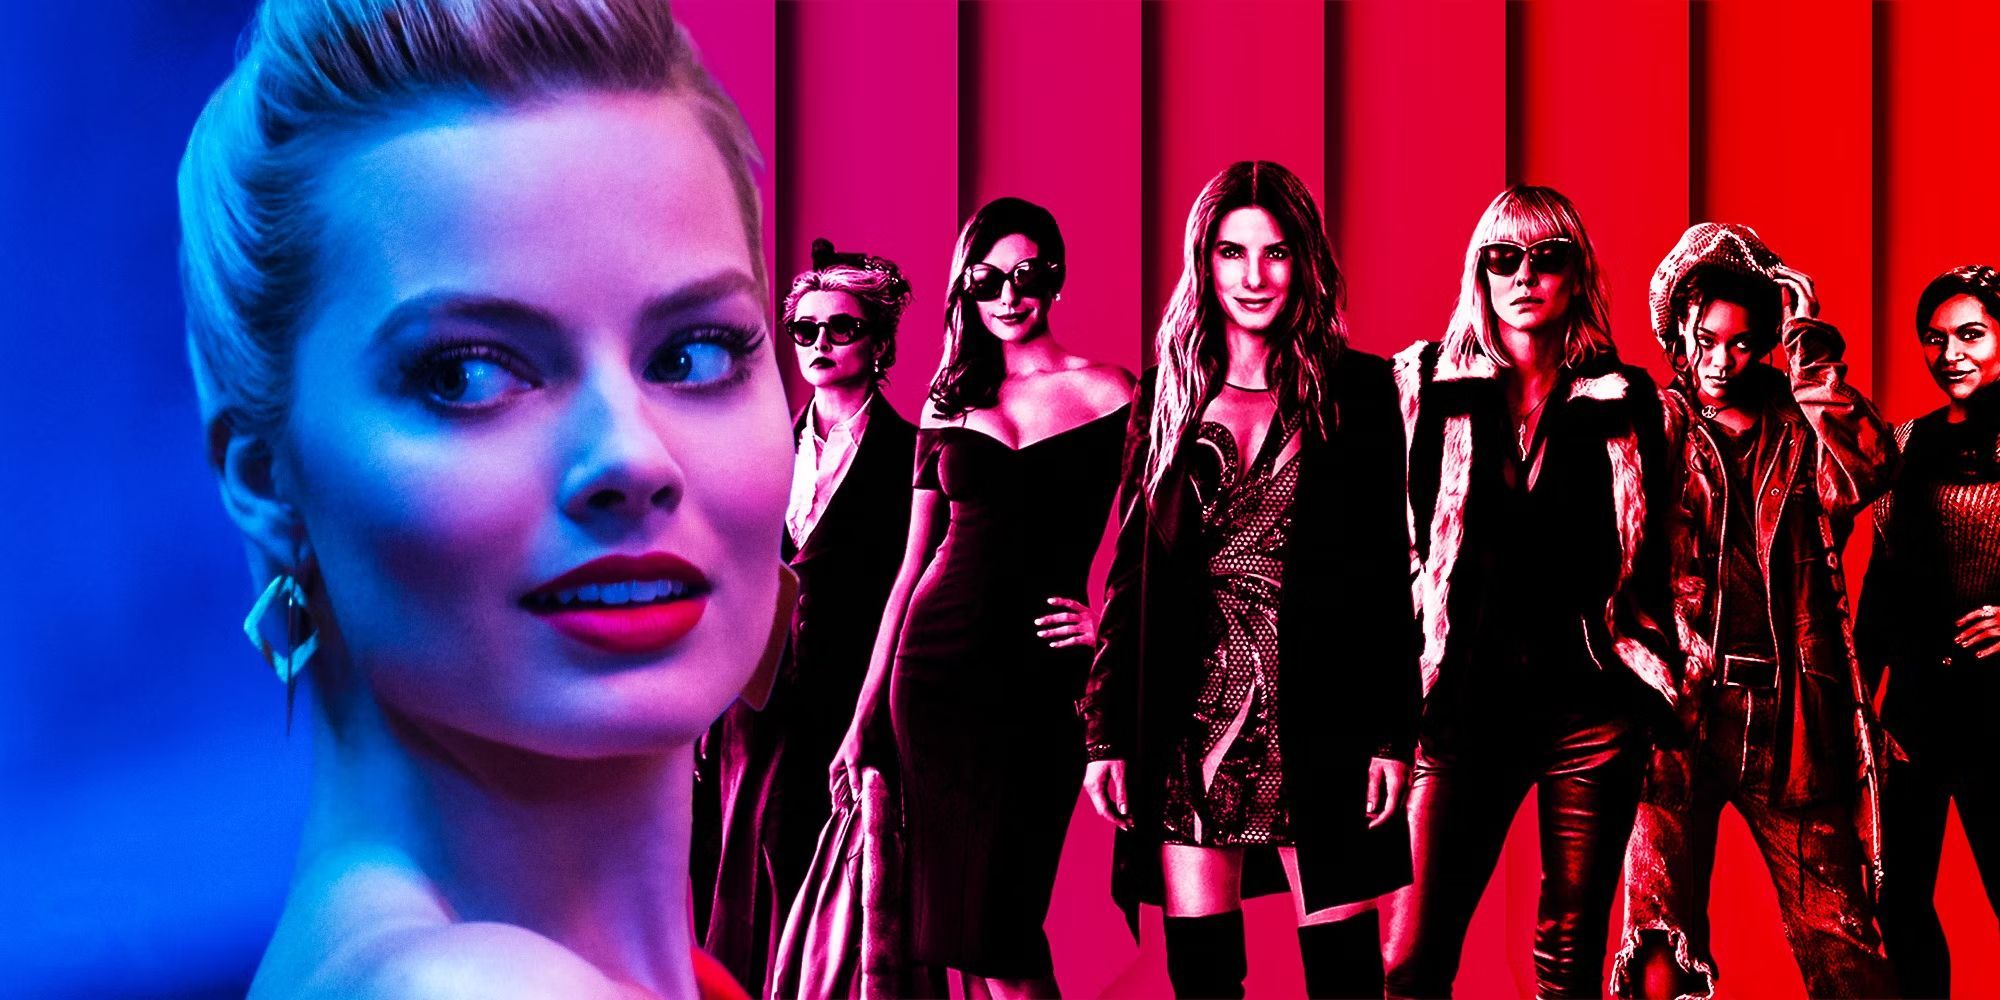 Margot Robbie and the cast of Oceans 8